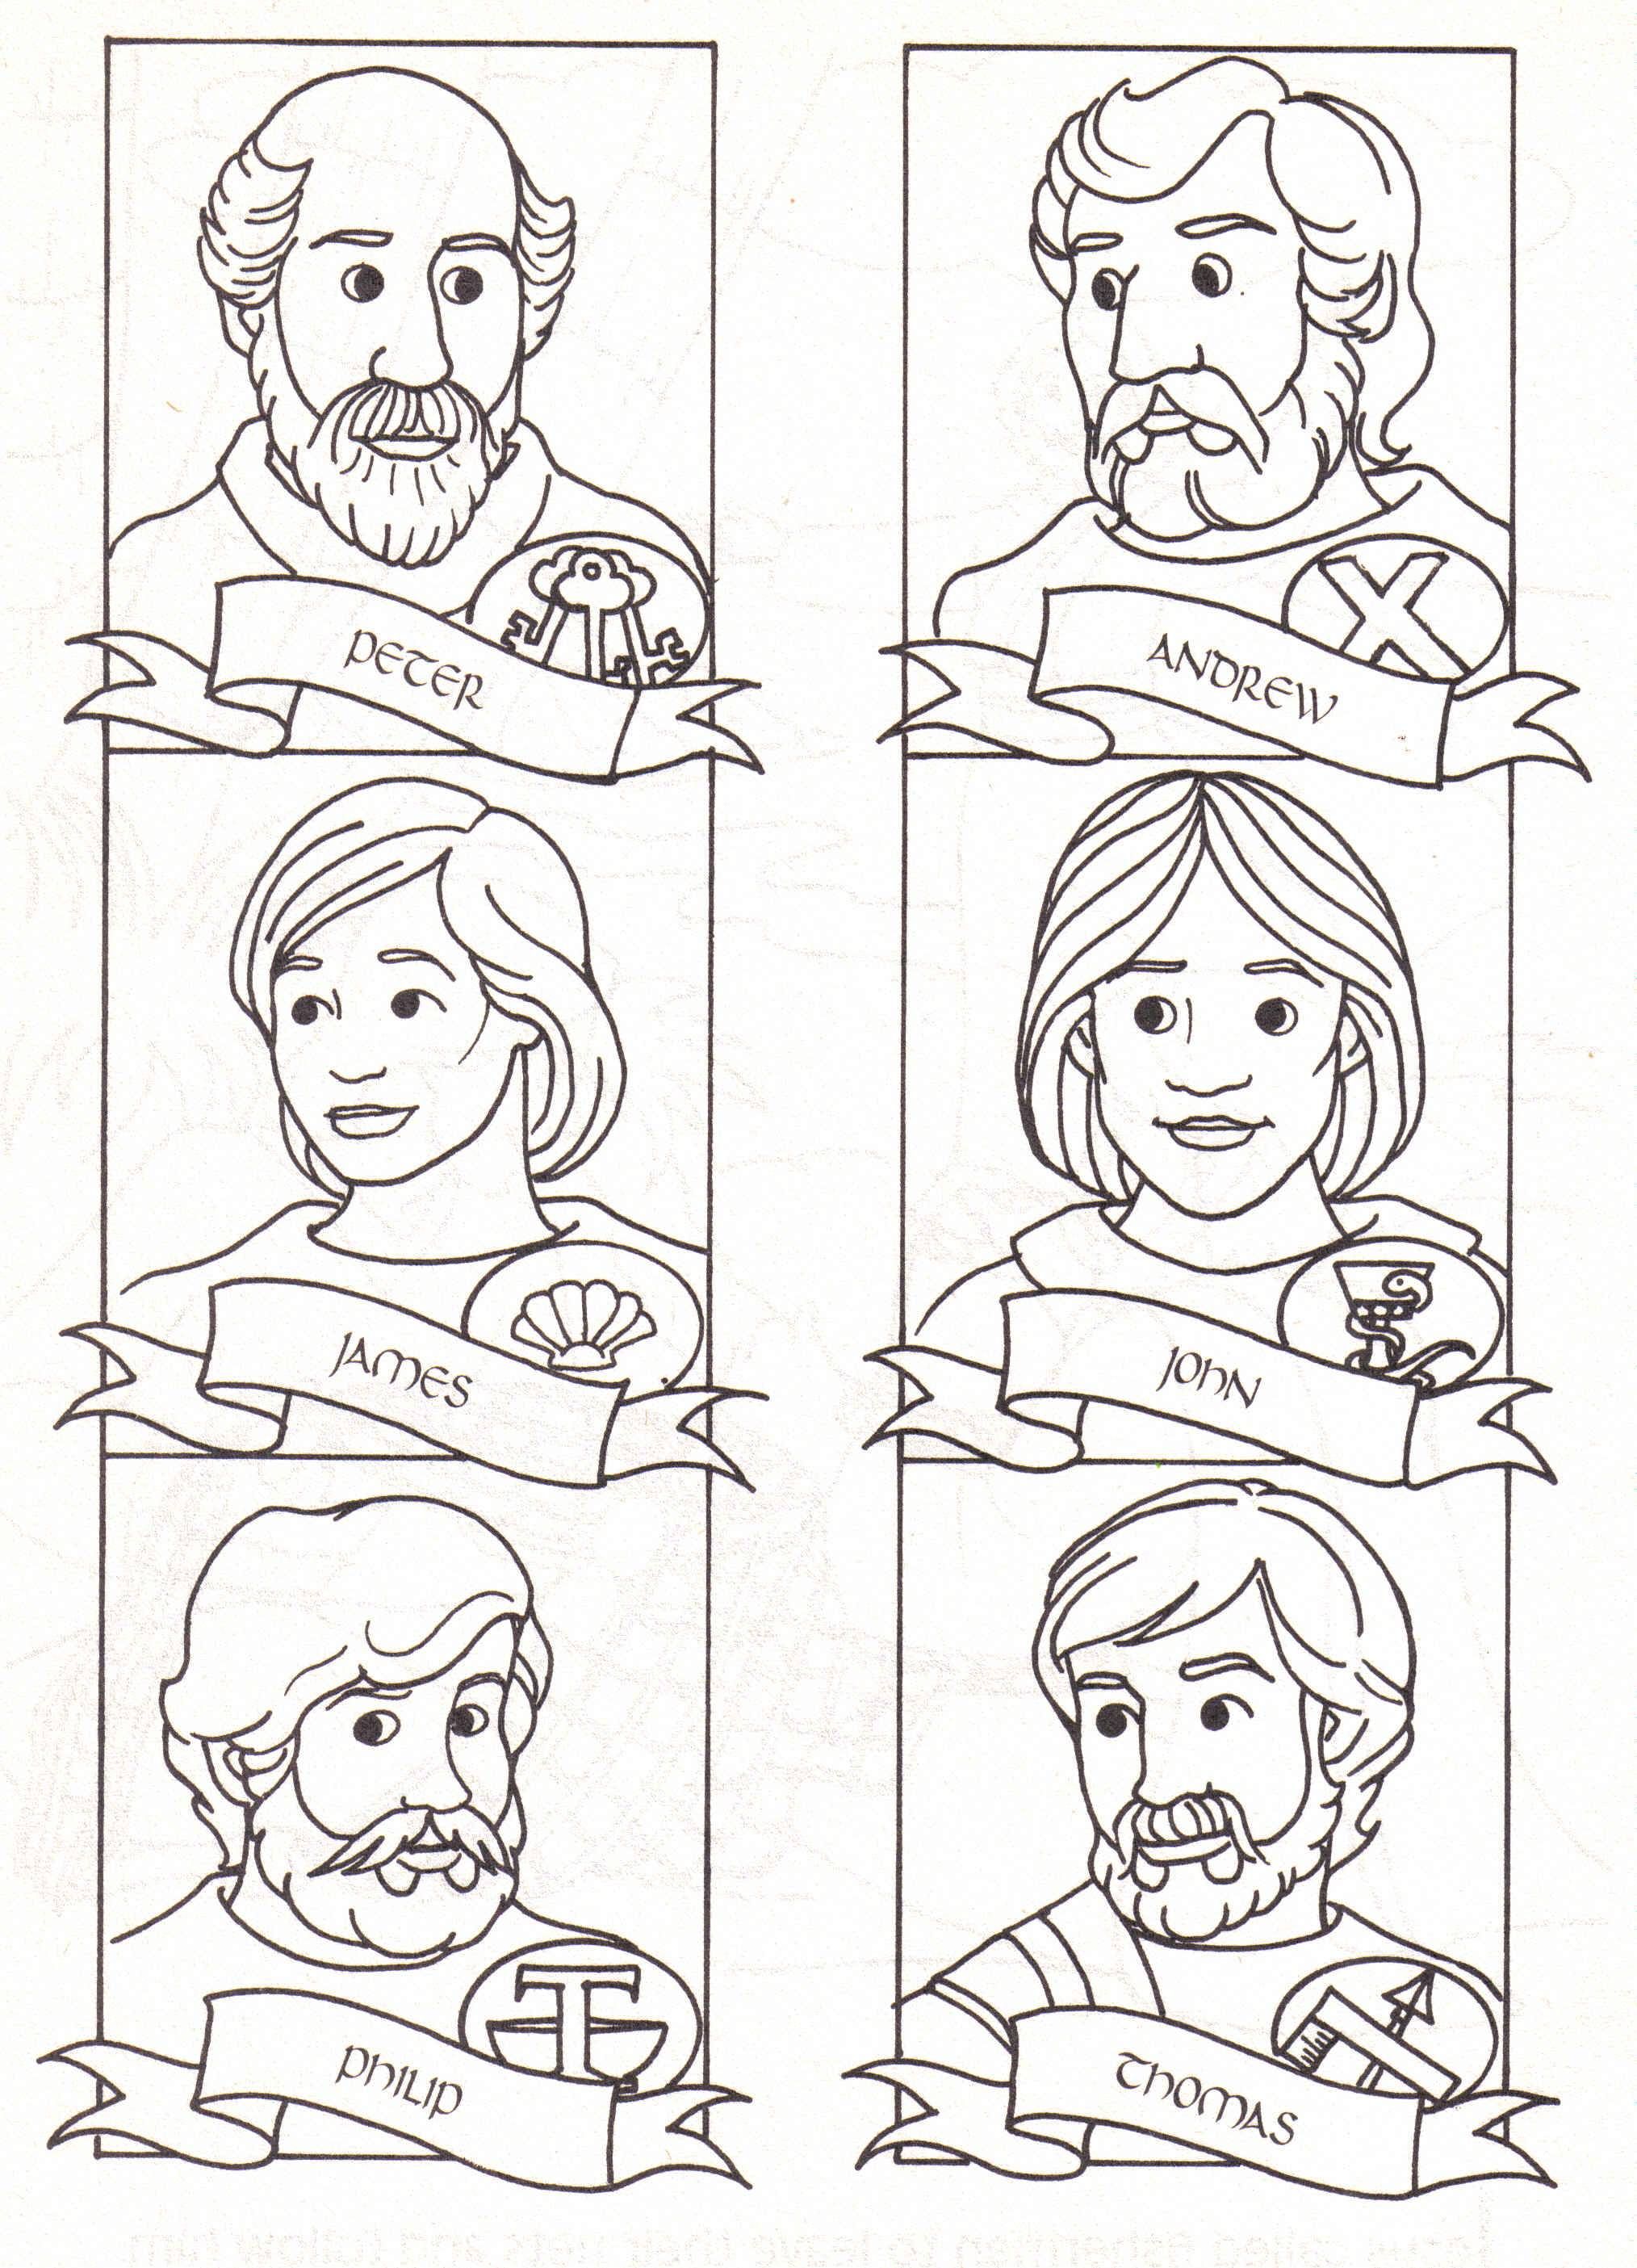 12 Disciples Coloring Page Download. I was thinking about making a ...